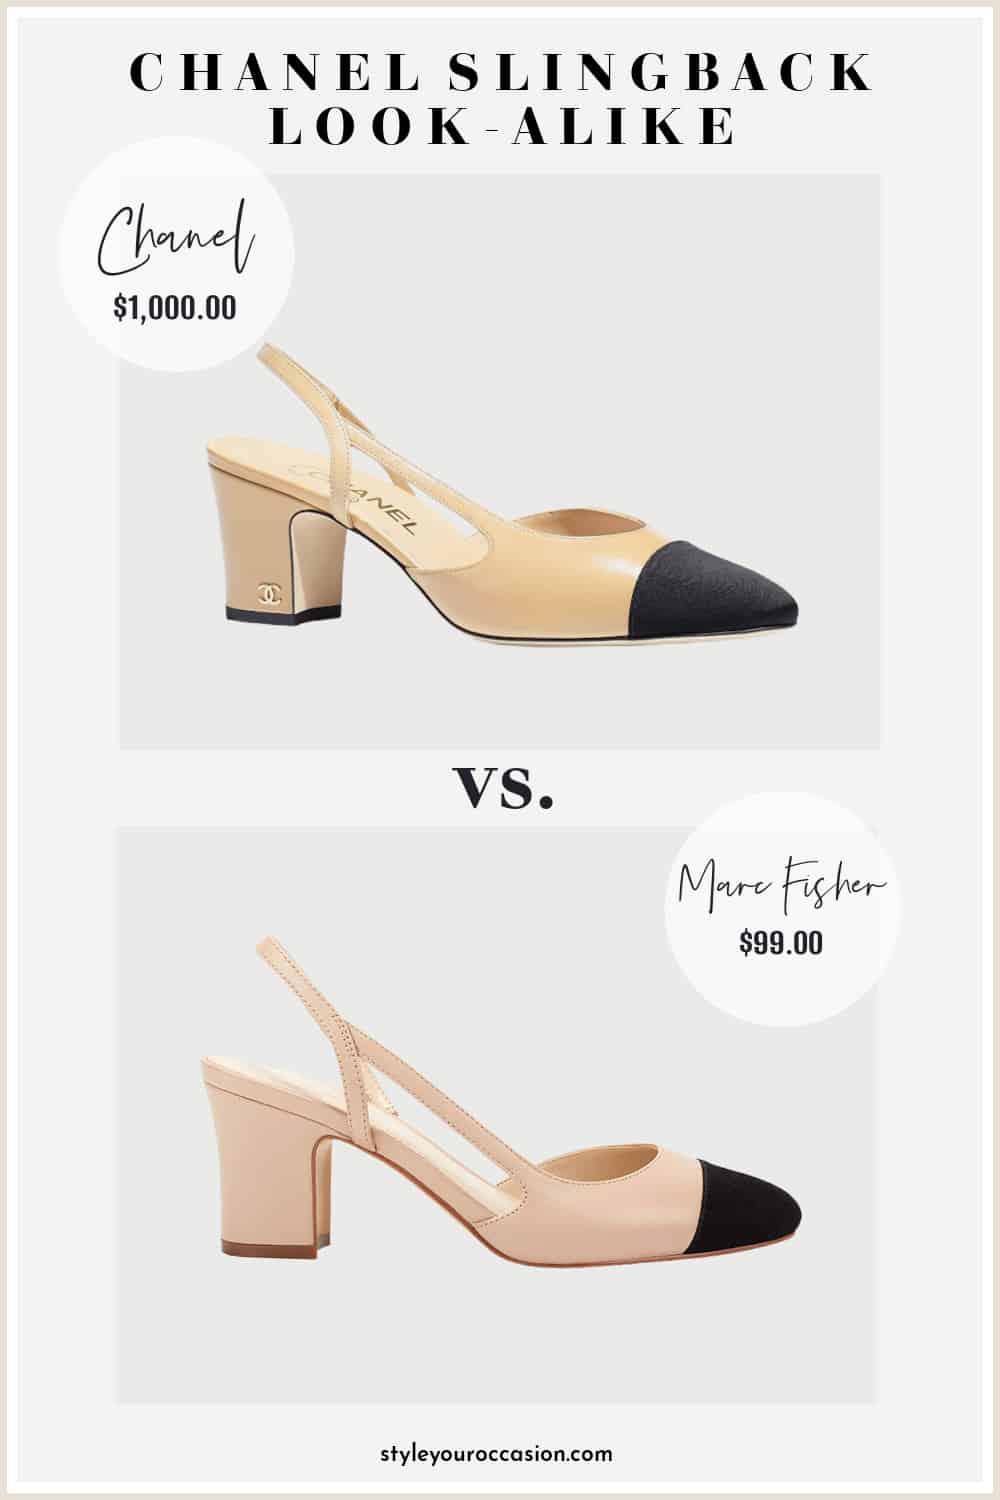 image comparing a tan Chanel slingback pump with a look-alike shoe